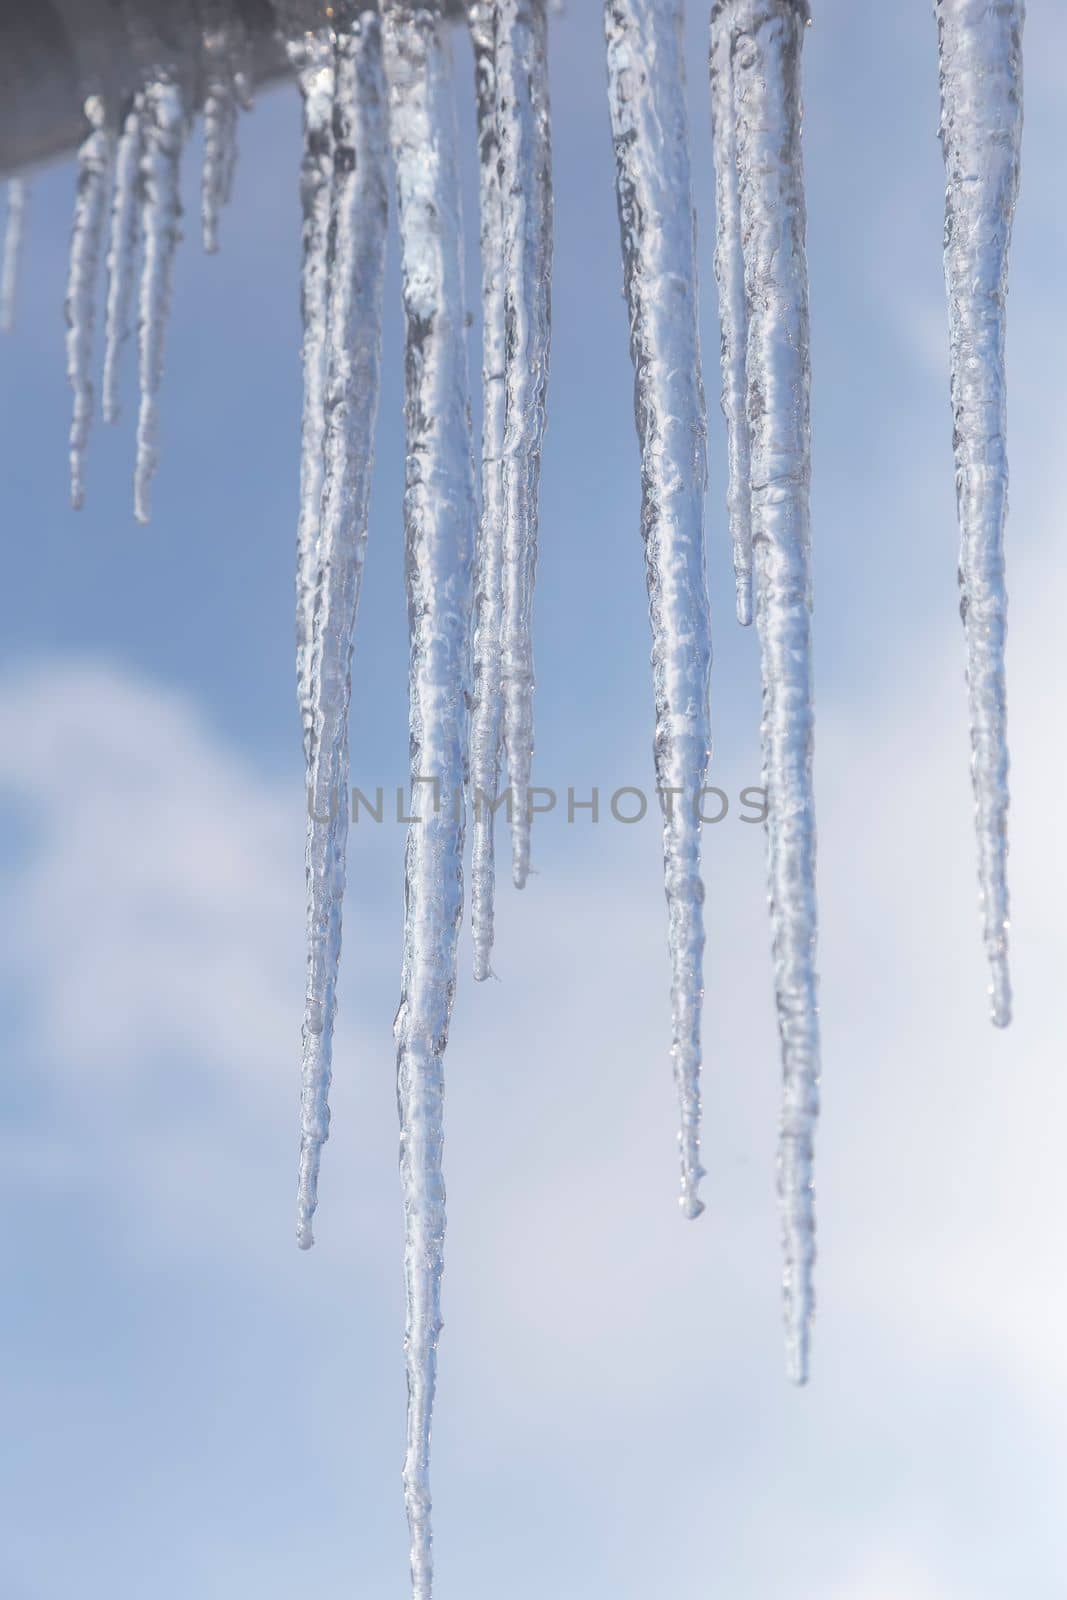 Long icicles of ice hang from the roof of the house. Presented against a background of blue sky with clouds